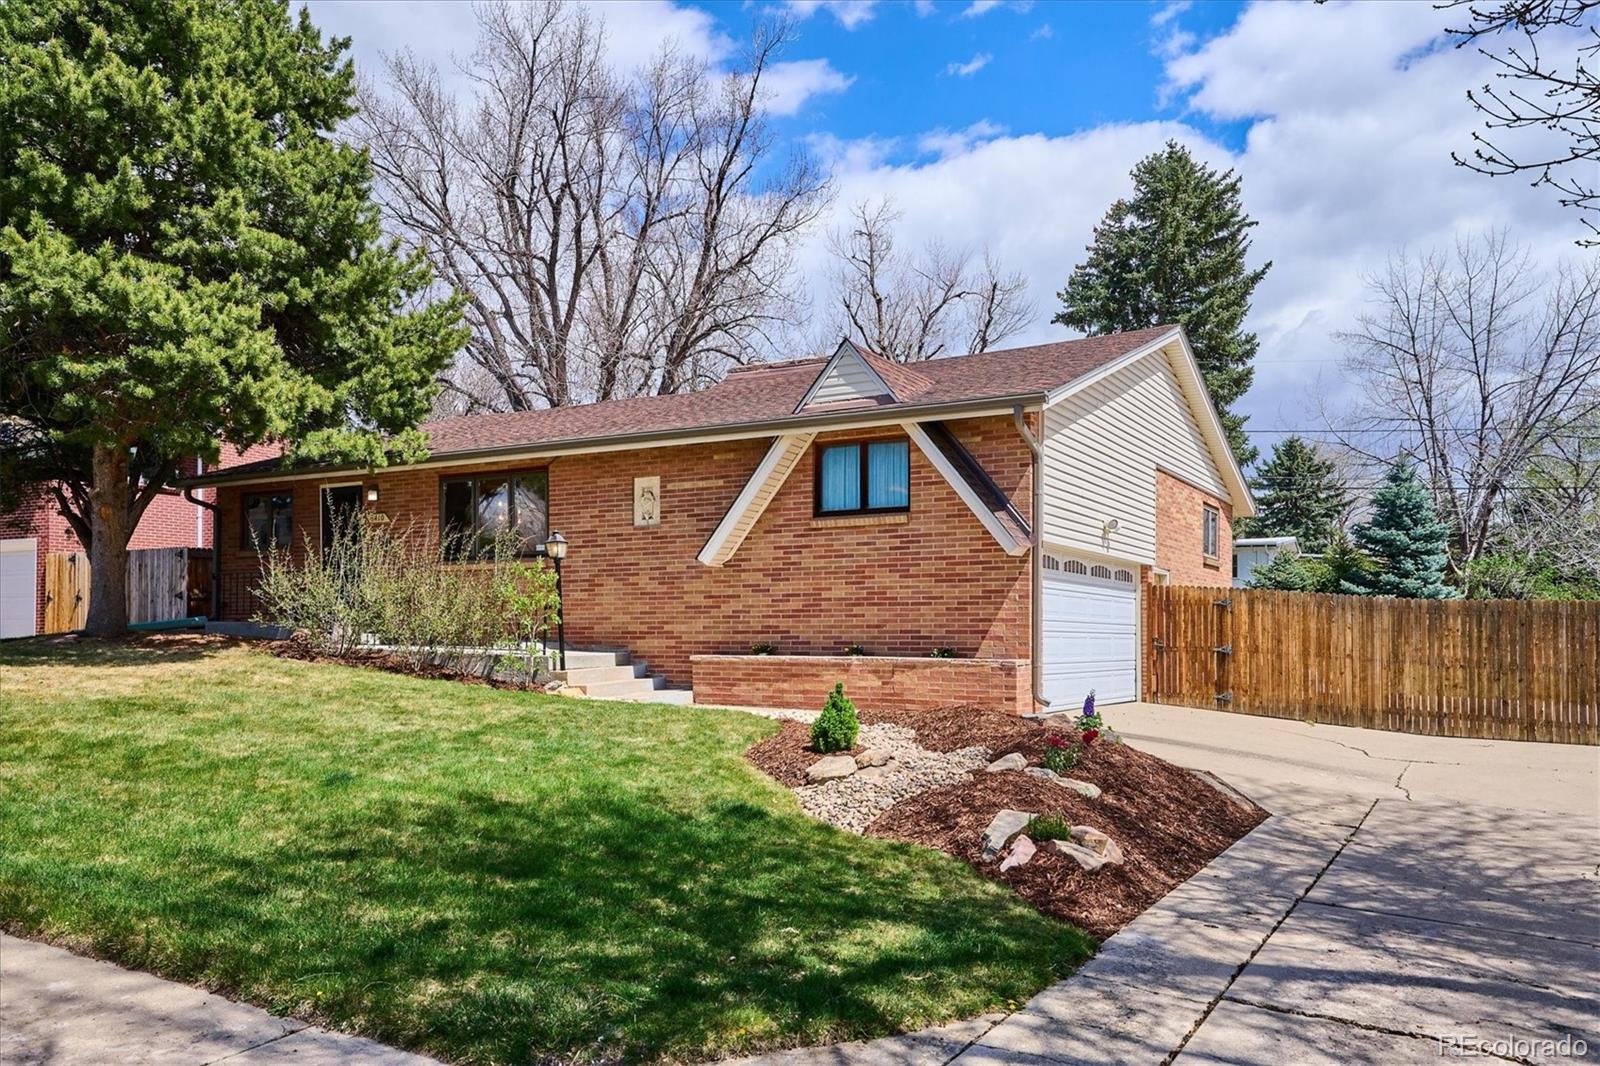 6410  brentwood street, Arvada sold home. Closed on 2024-05-24 for $610,000.